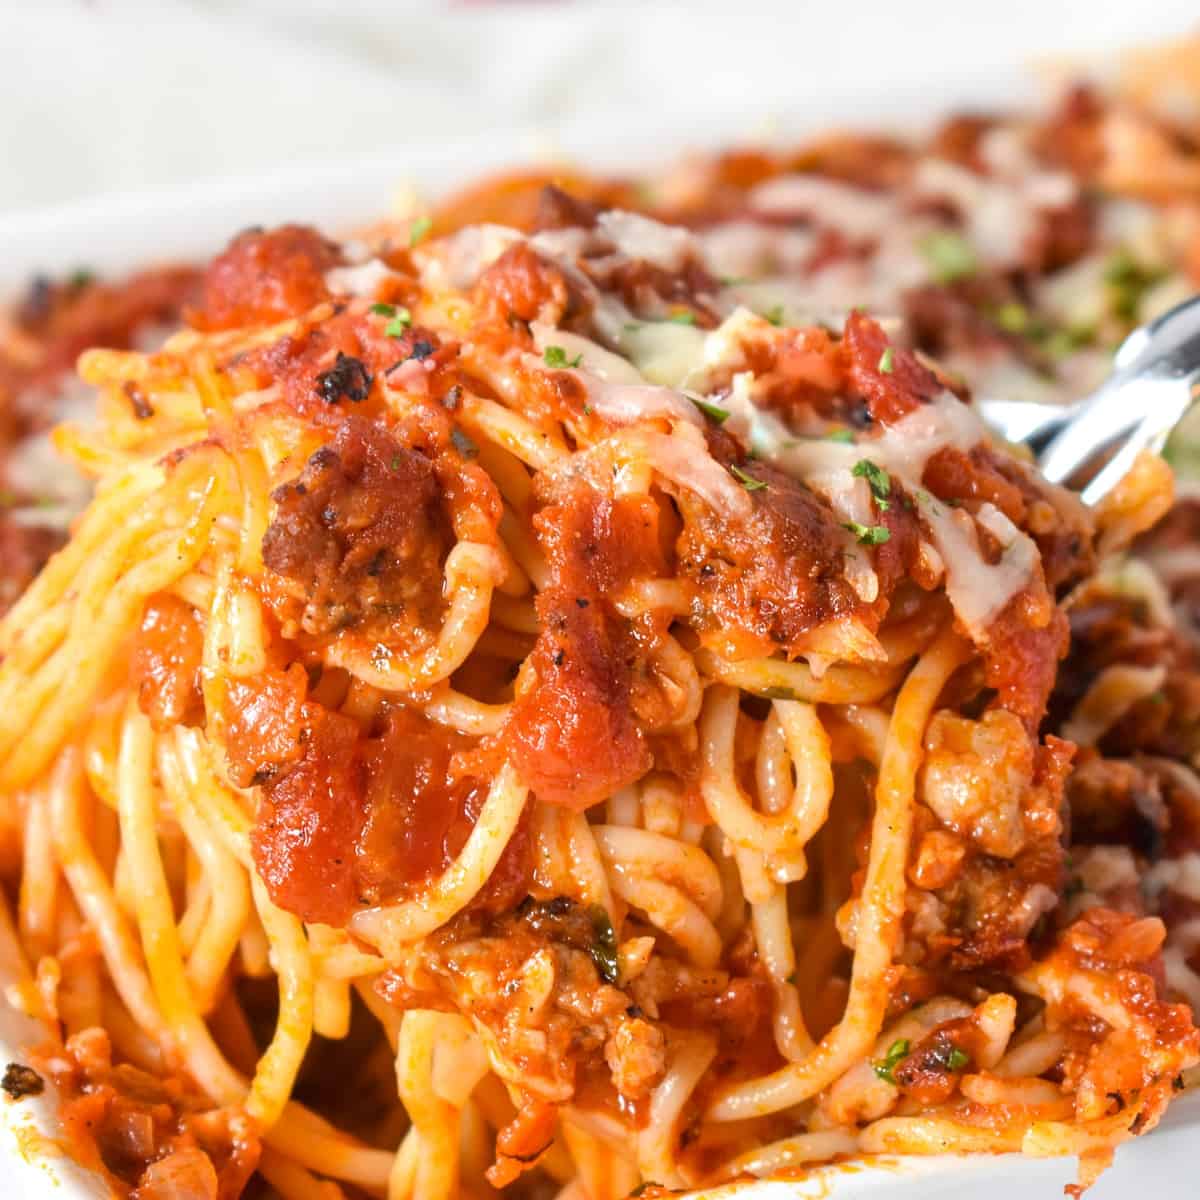 A close up image of the baked spaghetti.